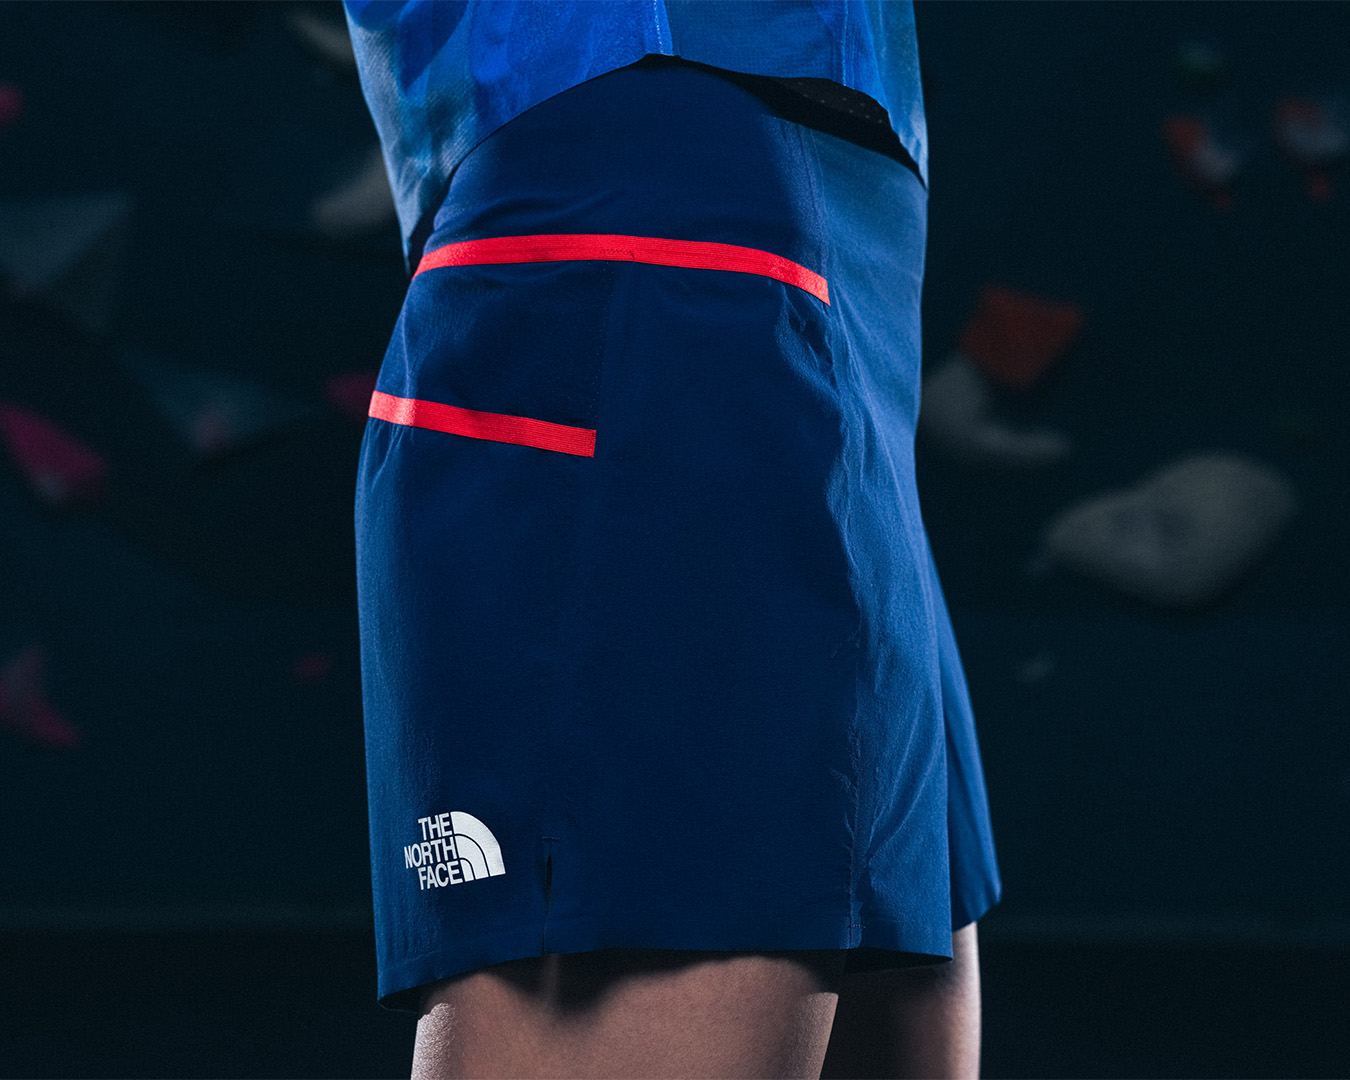 Close-up of a person in a blue and red The North Face skirt, focusing on the style and brand logo